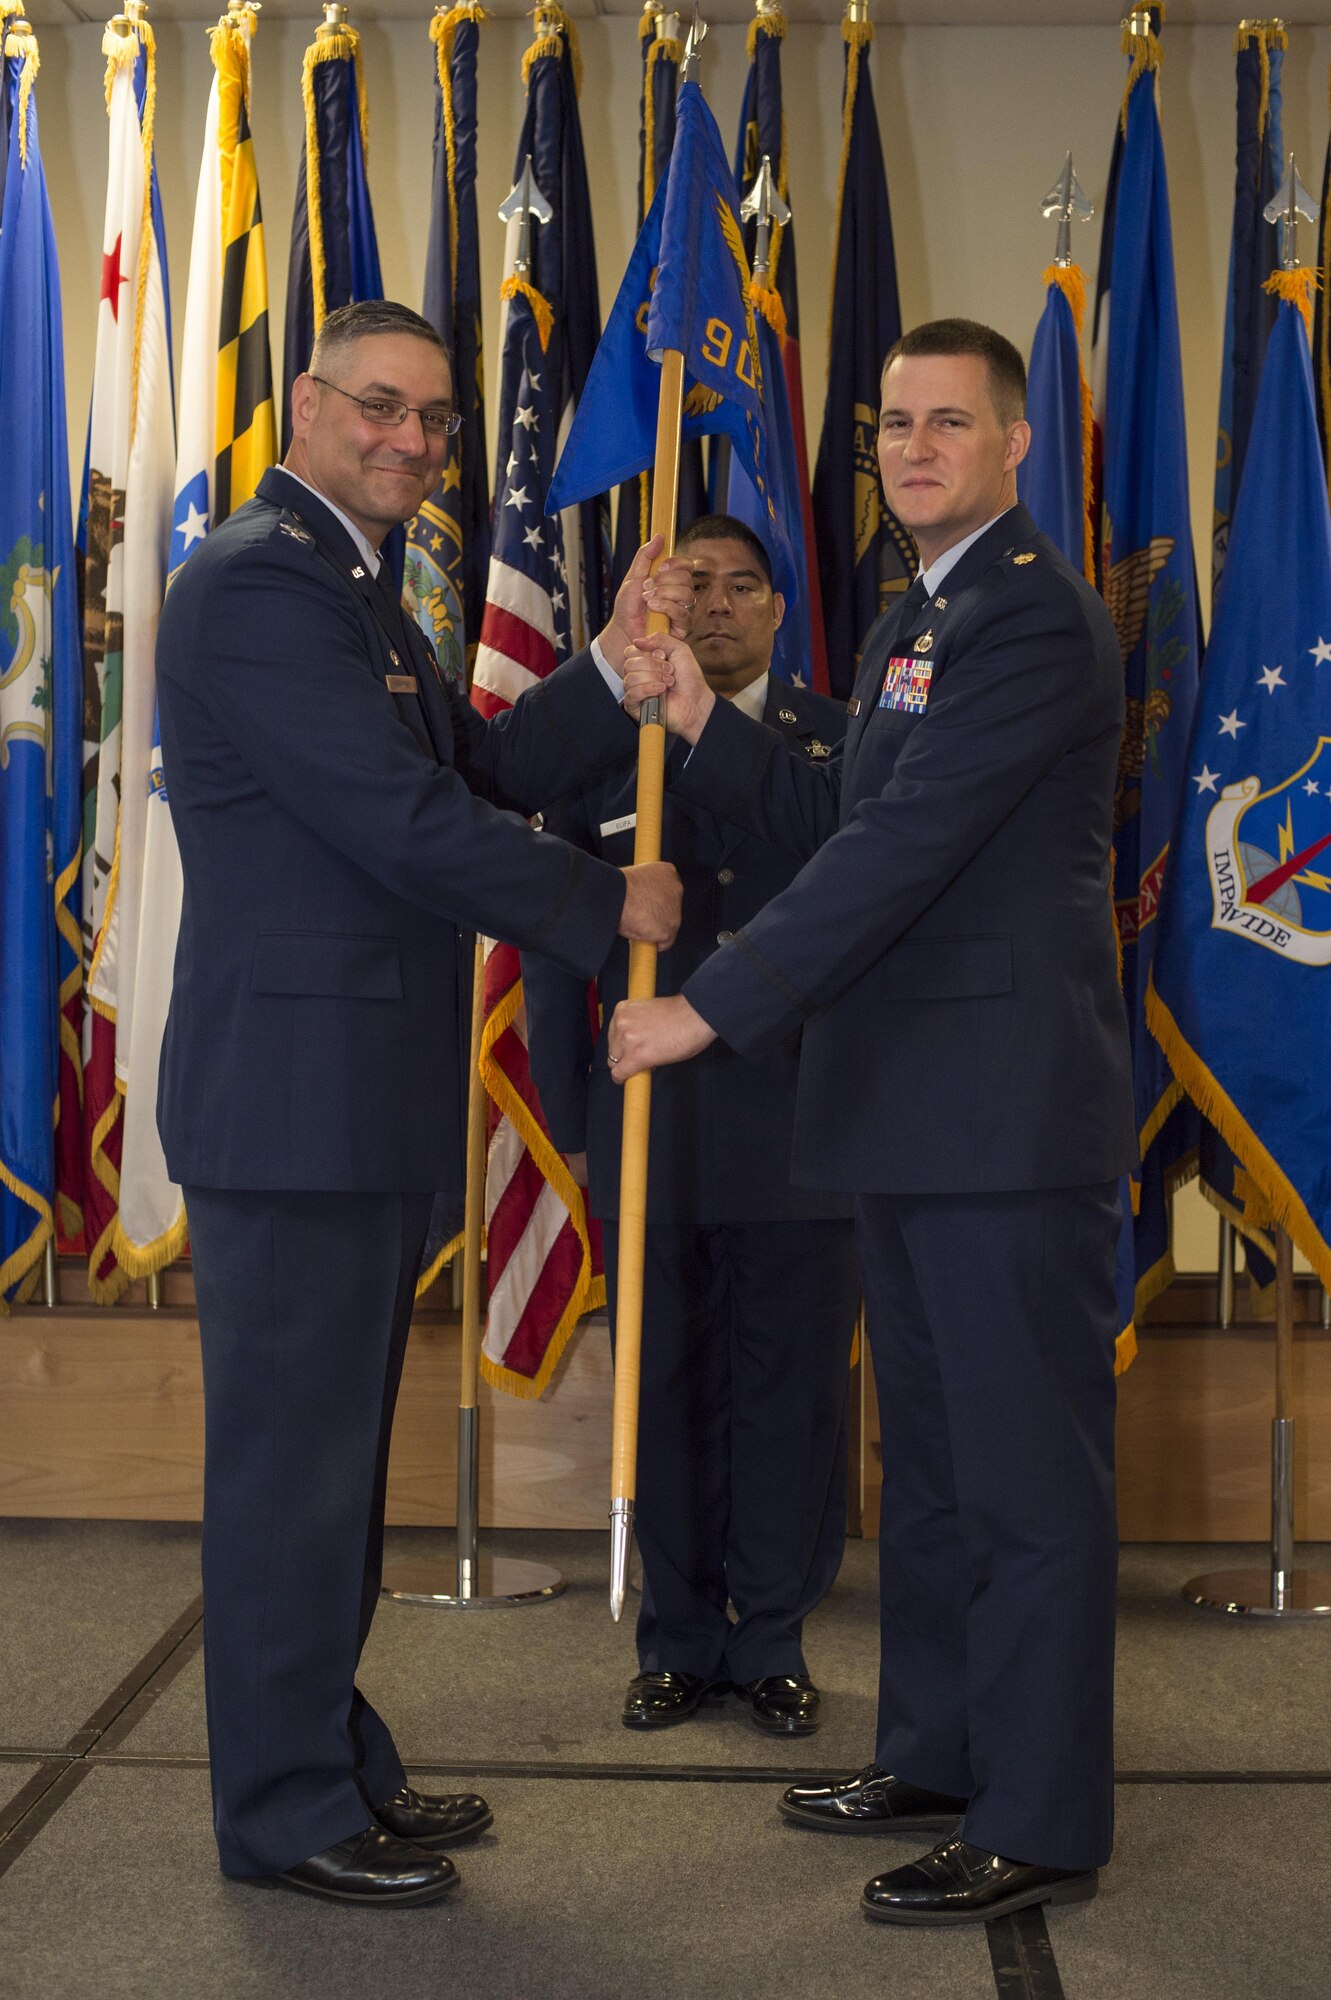 Maj. Andrew C. Wilkins, 90th Comptroller Squadron commander, takes the 90th CPTS guidon from Col. Stephen M. Kravitsky, 90th Missile Wing commander, during a change-of-command ceremony June 20, 2016, inside Trail’s End Community Center at F.E. Warren Air Force Base, Wyo. The passing of the guidon stems from military tradition, with the guidon symbolizing a flag that soldiers would rally behind during battles. (U.S. Air Force photo By Staff Sgt. Christopher Ruano)